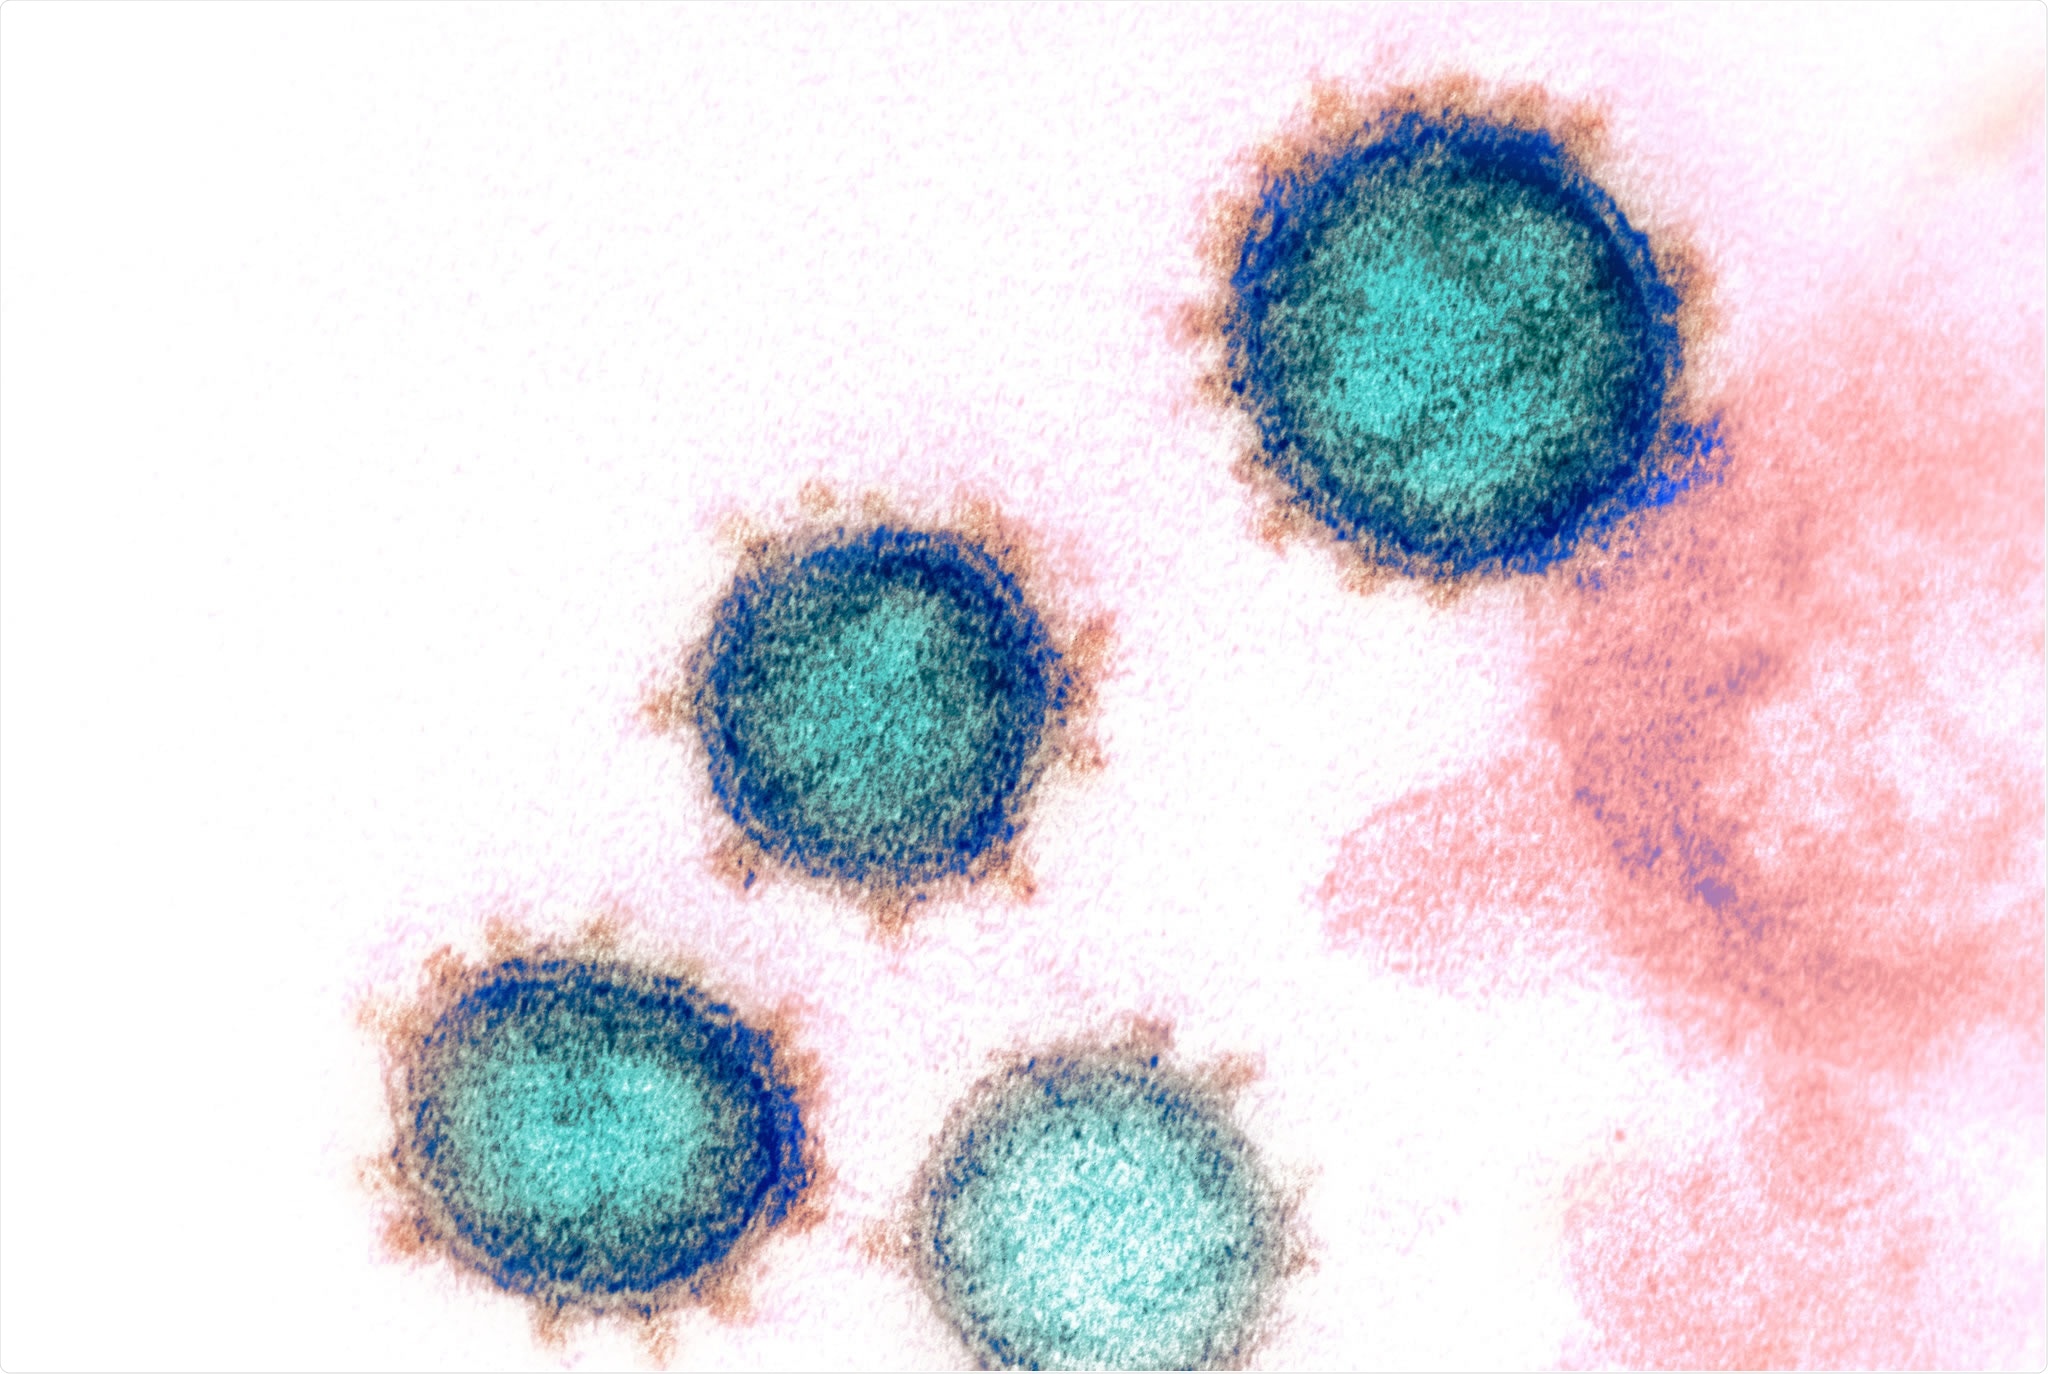 A pair of non-competing neutralizing human monoclonal antibodies protecting from disease in a SARS-CoV-2 infection model. Image Credit: NIAID